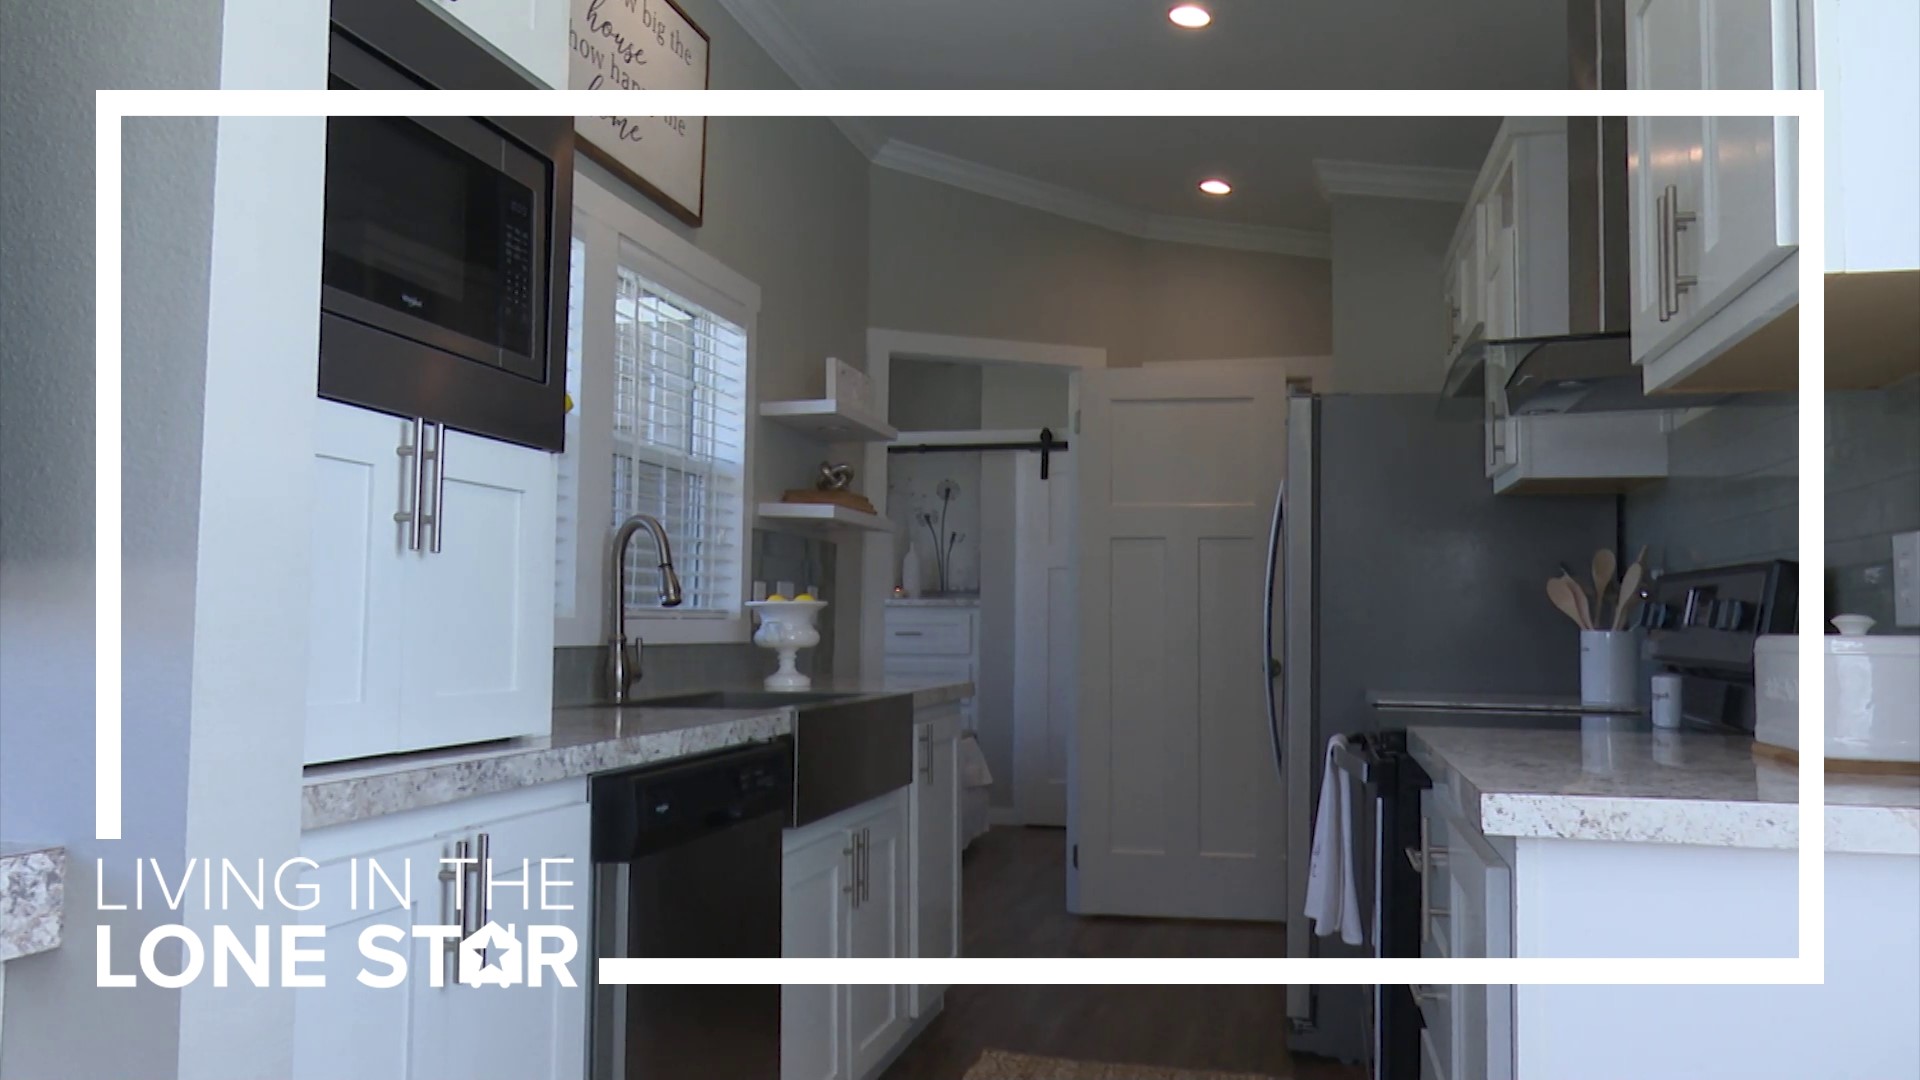 Co-owner Georgette Freels gives us a look around a tiny home with a focus on outdoor living.